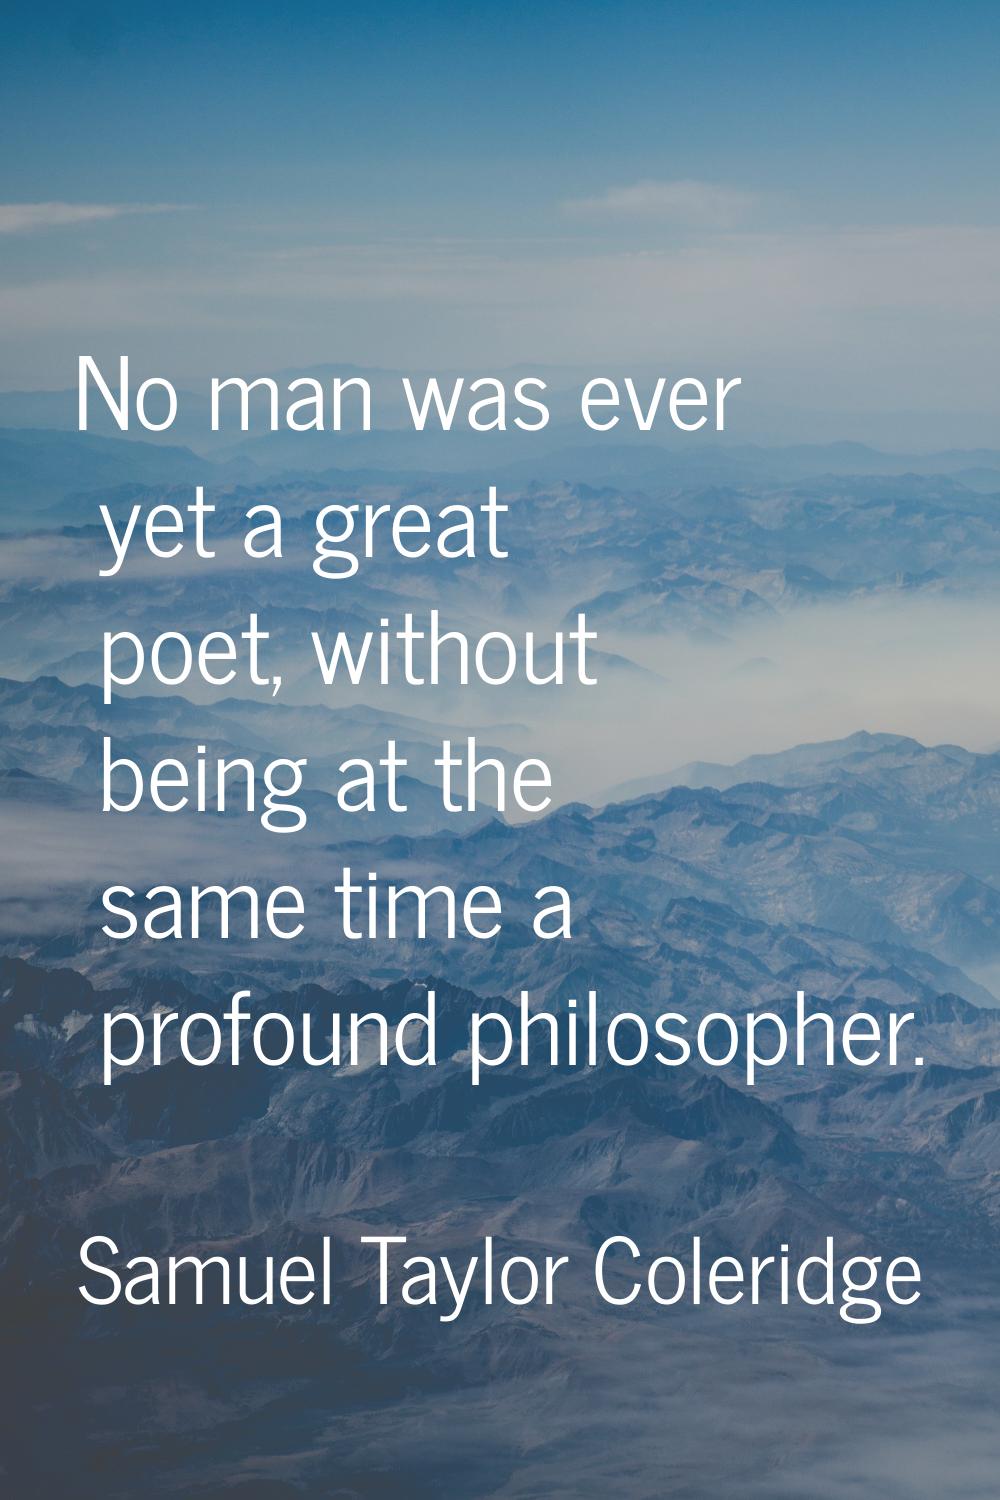 No man was ever yet a great poet, without being at the same time a profound philosopher.